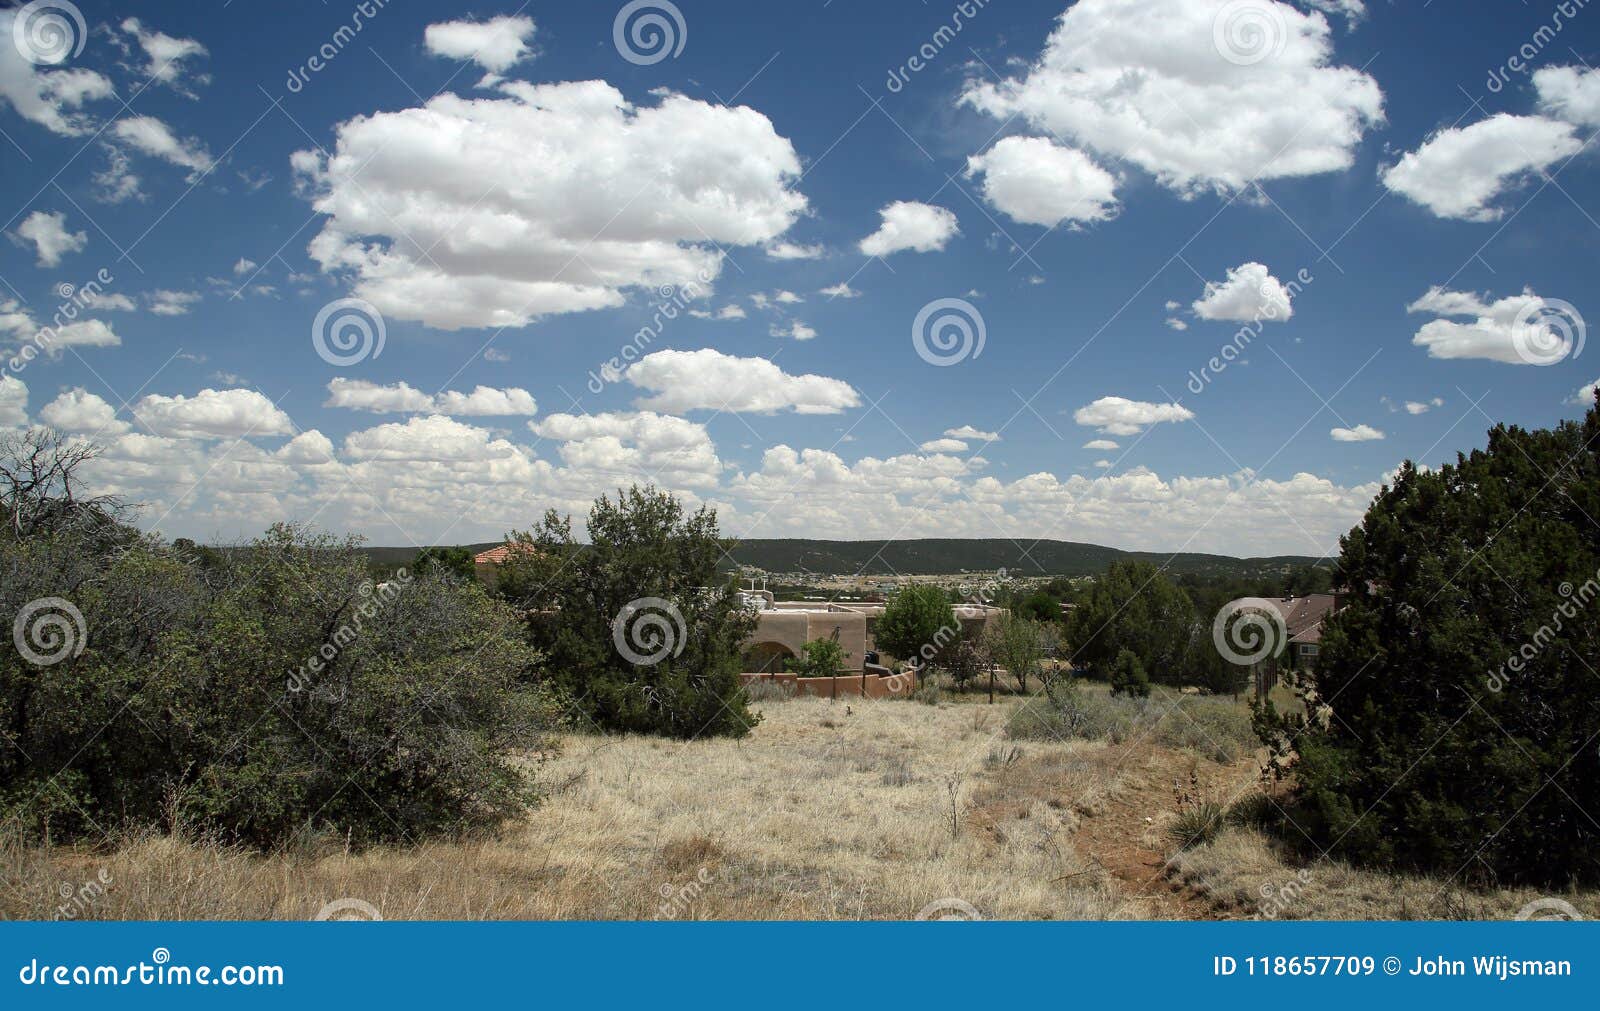 landscape with shrubs blue sky and cloud with a view of the high desert from tijeras